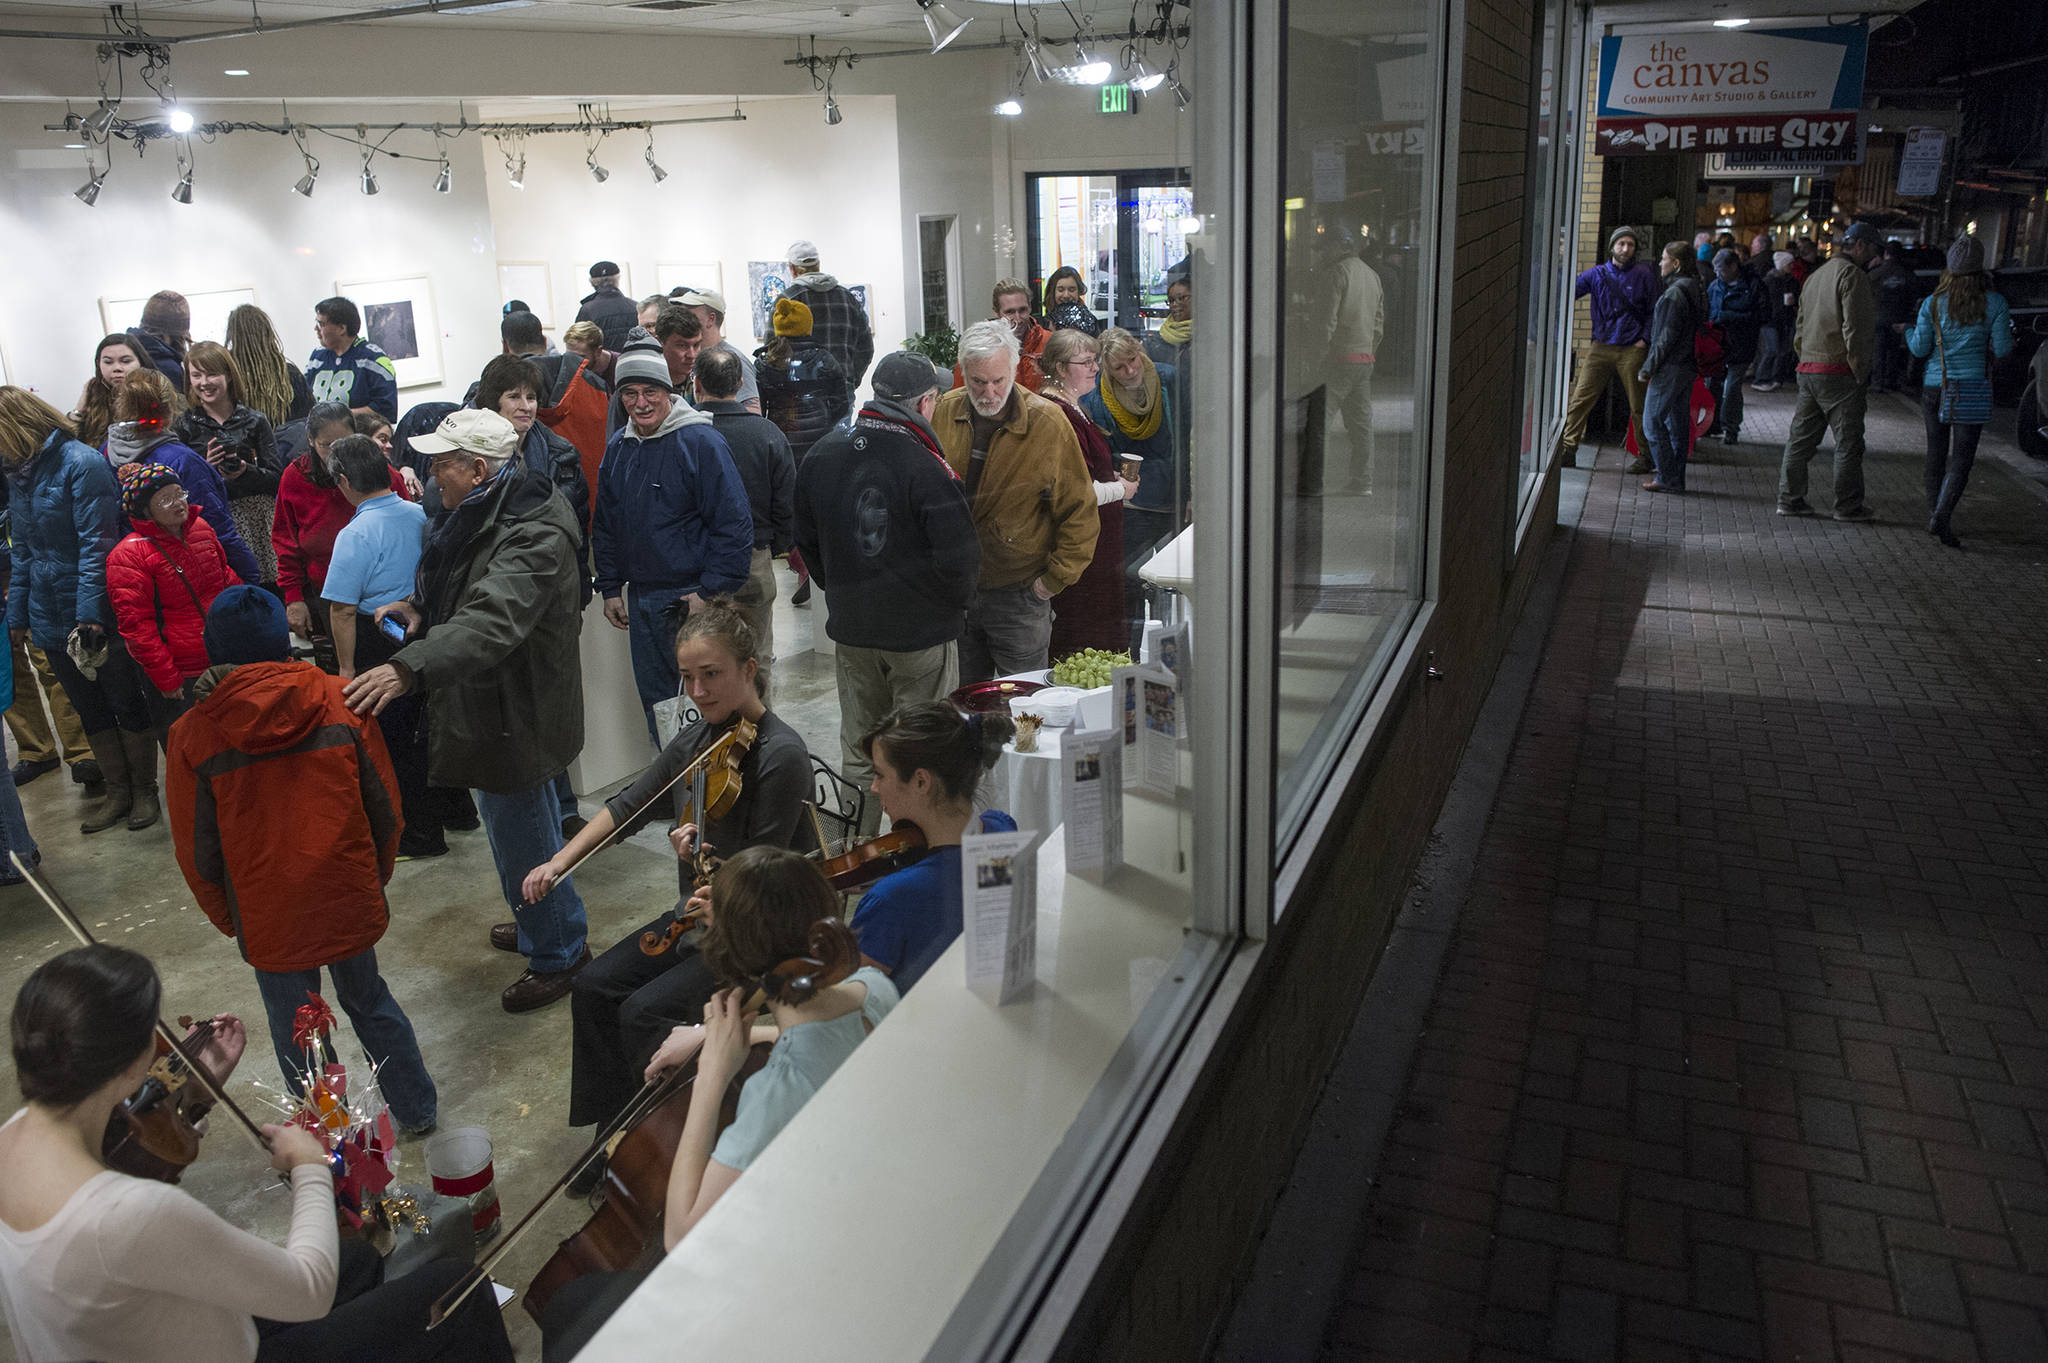 In this December 2015 photo, Juneau residents view artwork and listen to music at The Canvas during Gallery Walk. (Michael Penn | Juneau Empire File)